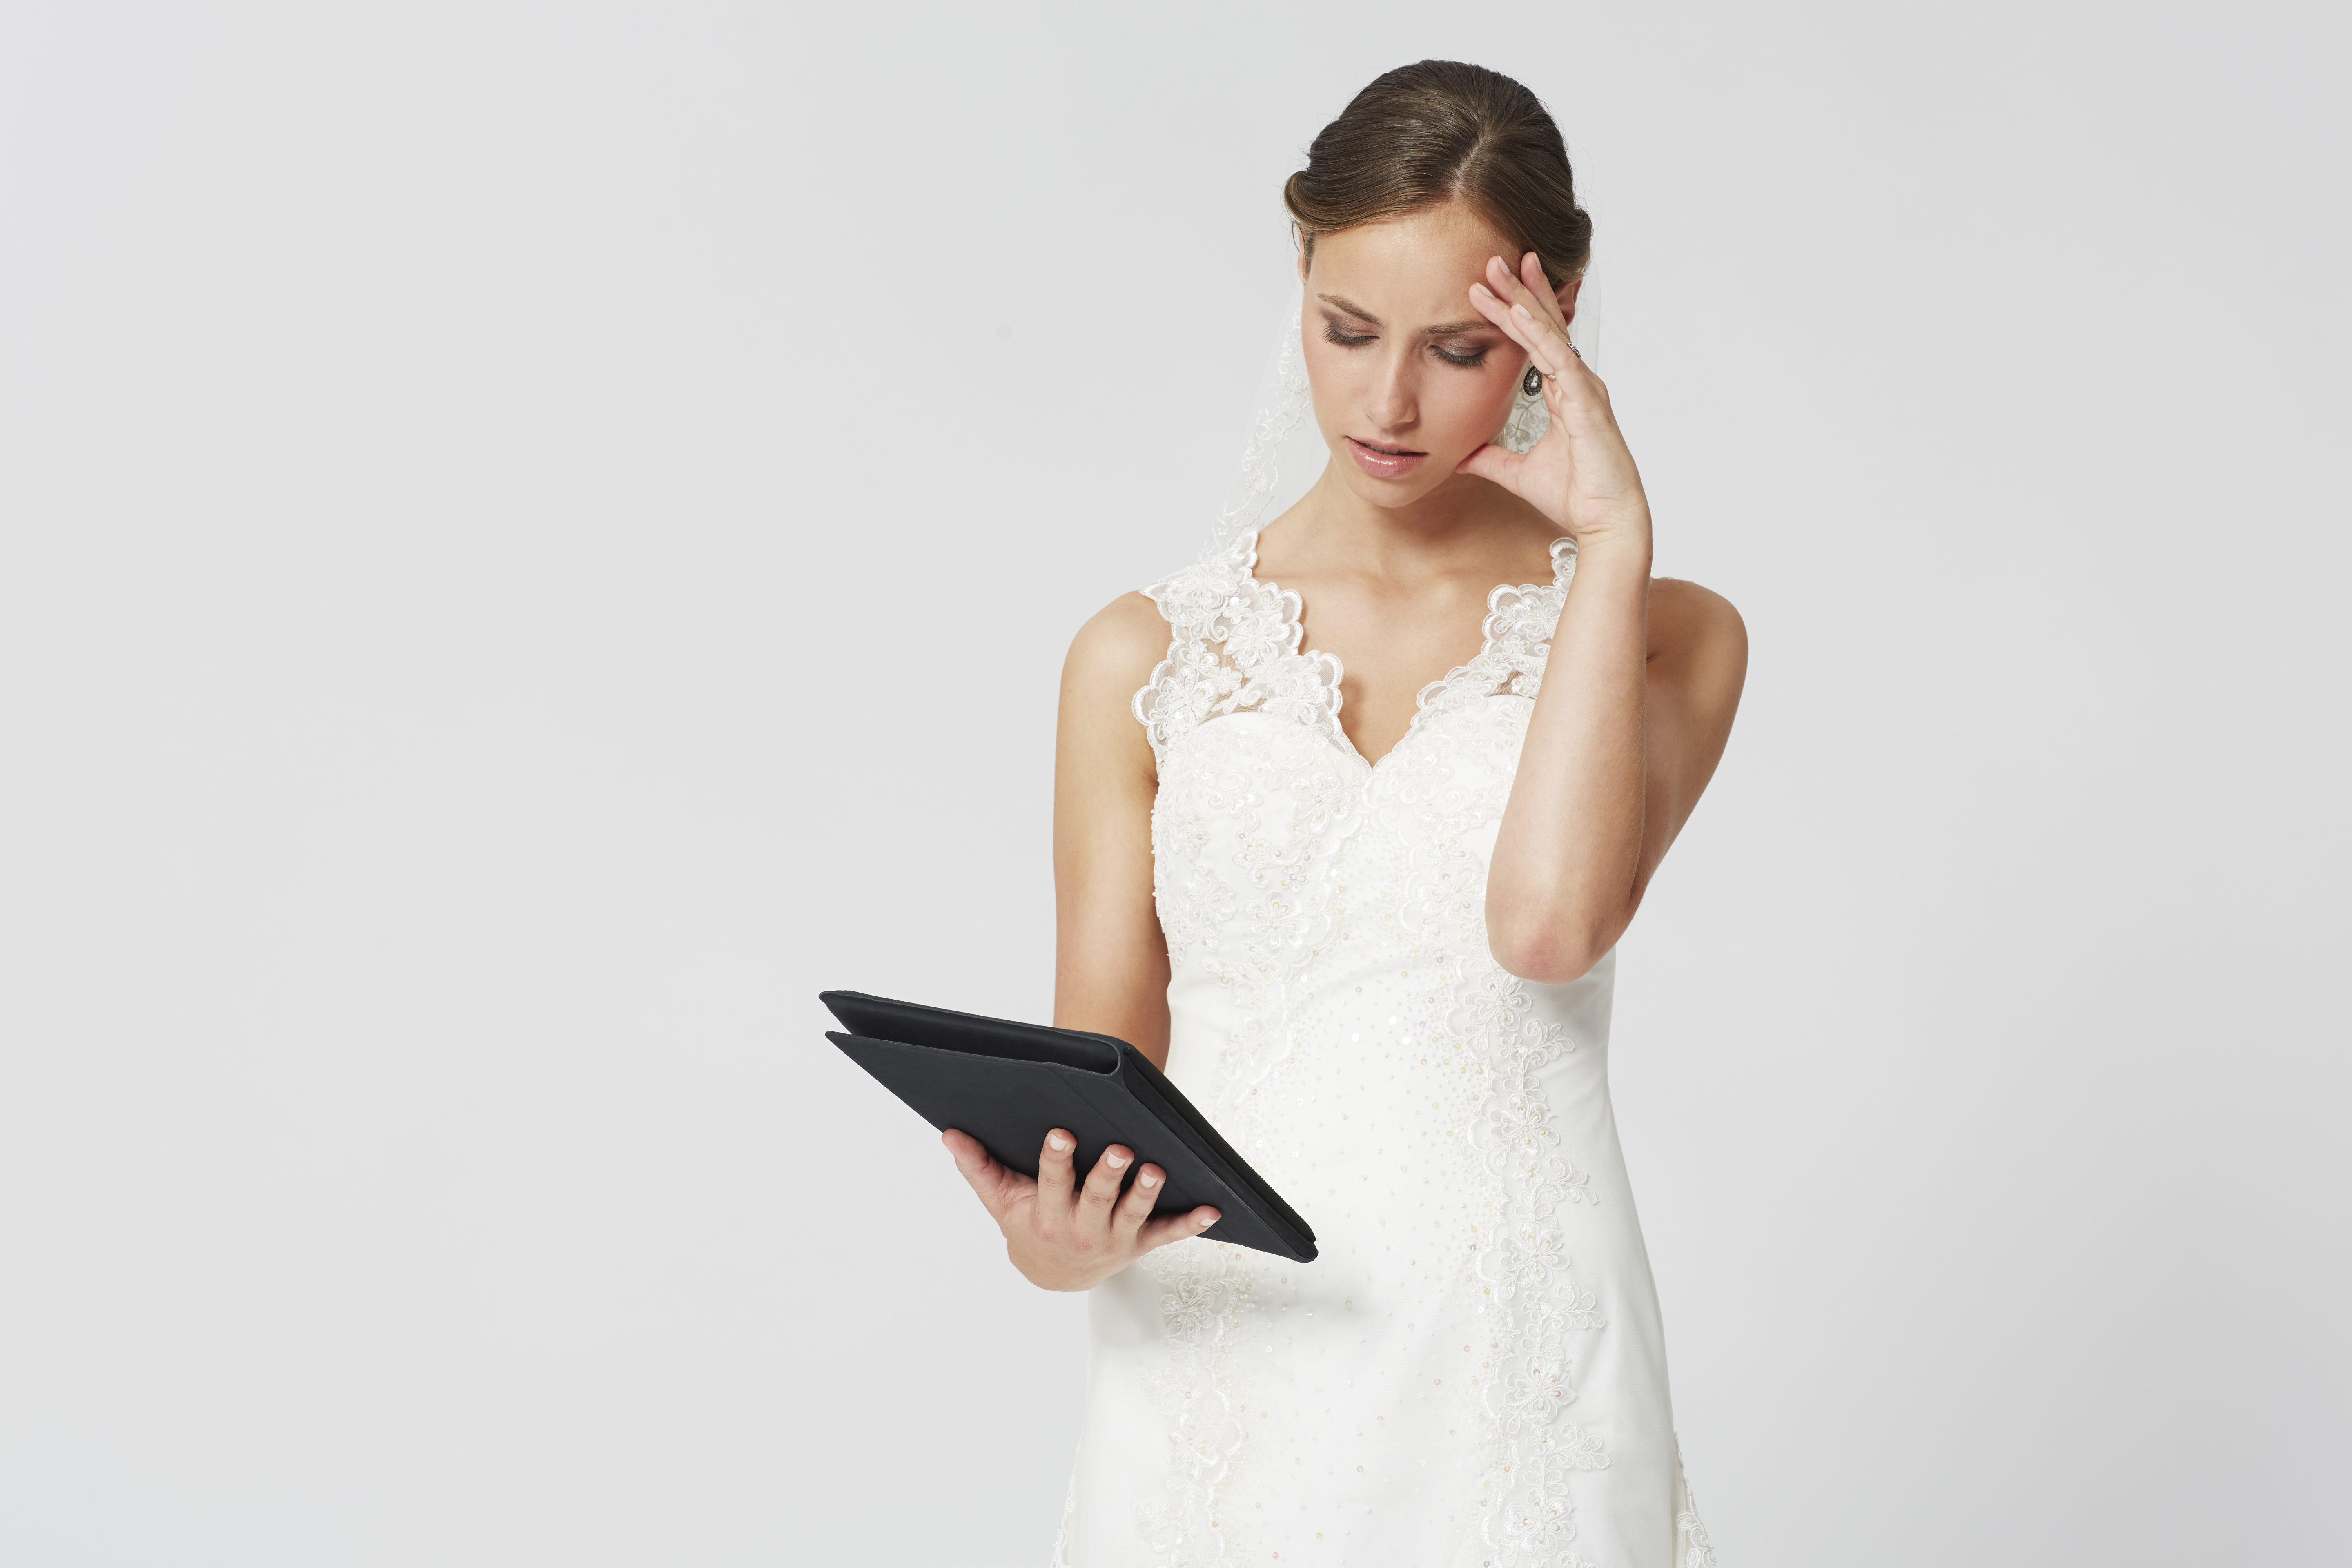 A woman in a white bridal dress looking confused while holding a tablet | Source: Shutterstock